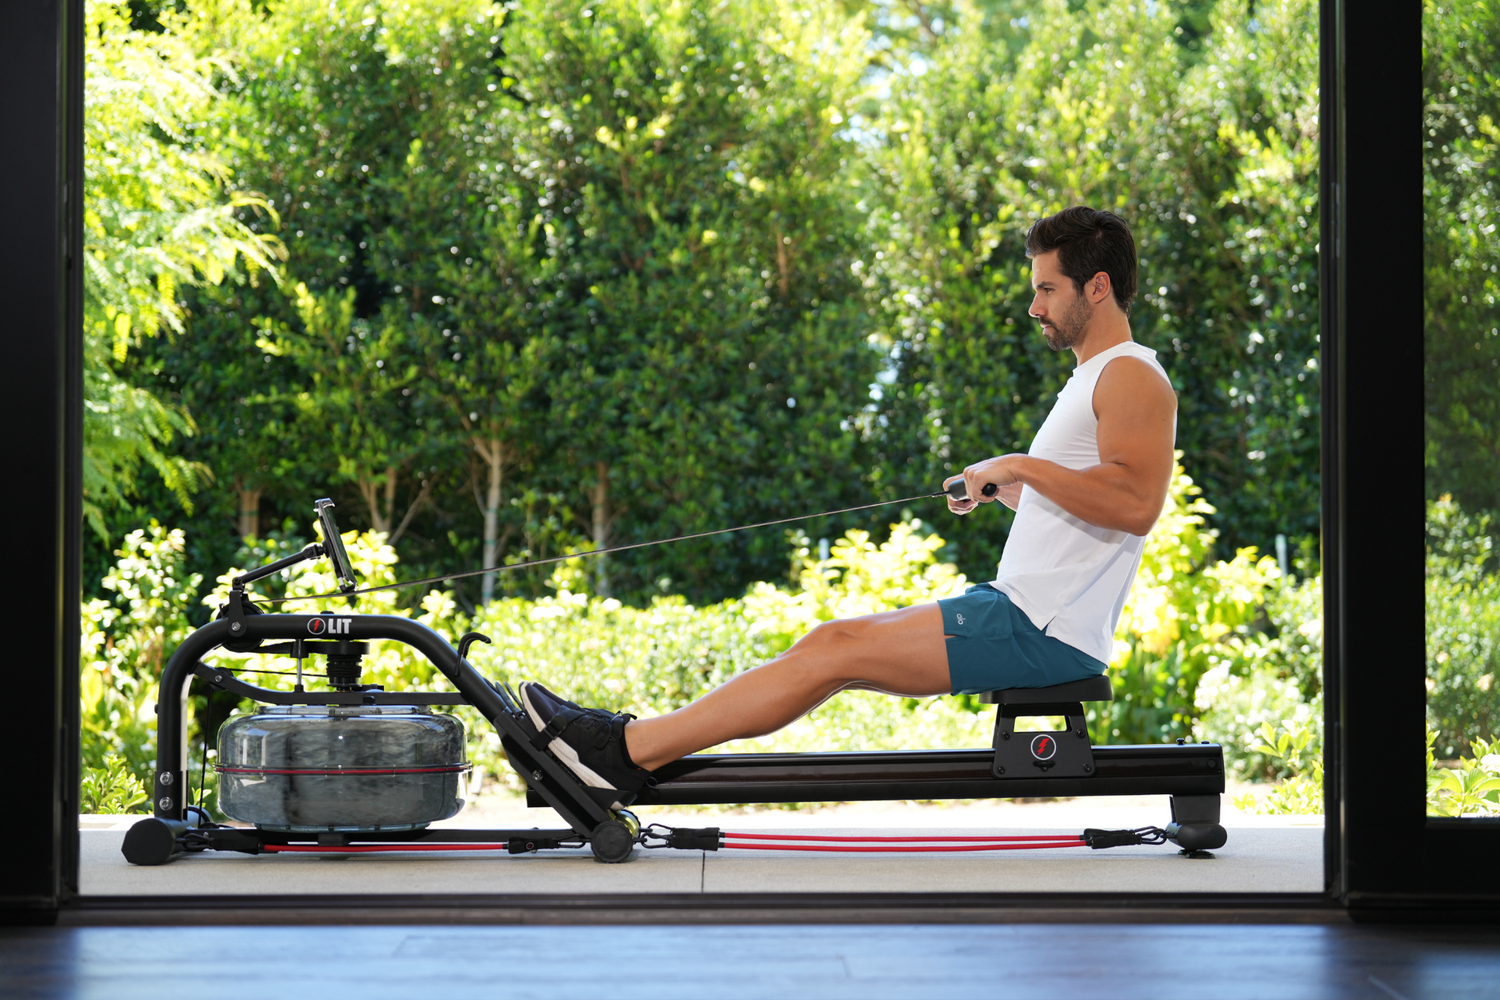 Intermediate Rowing Workout: Build Your Endurance and Rowing